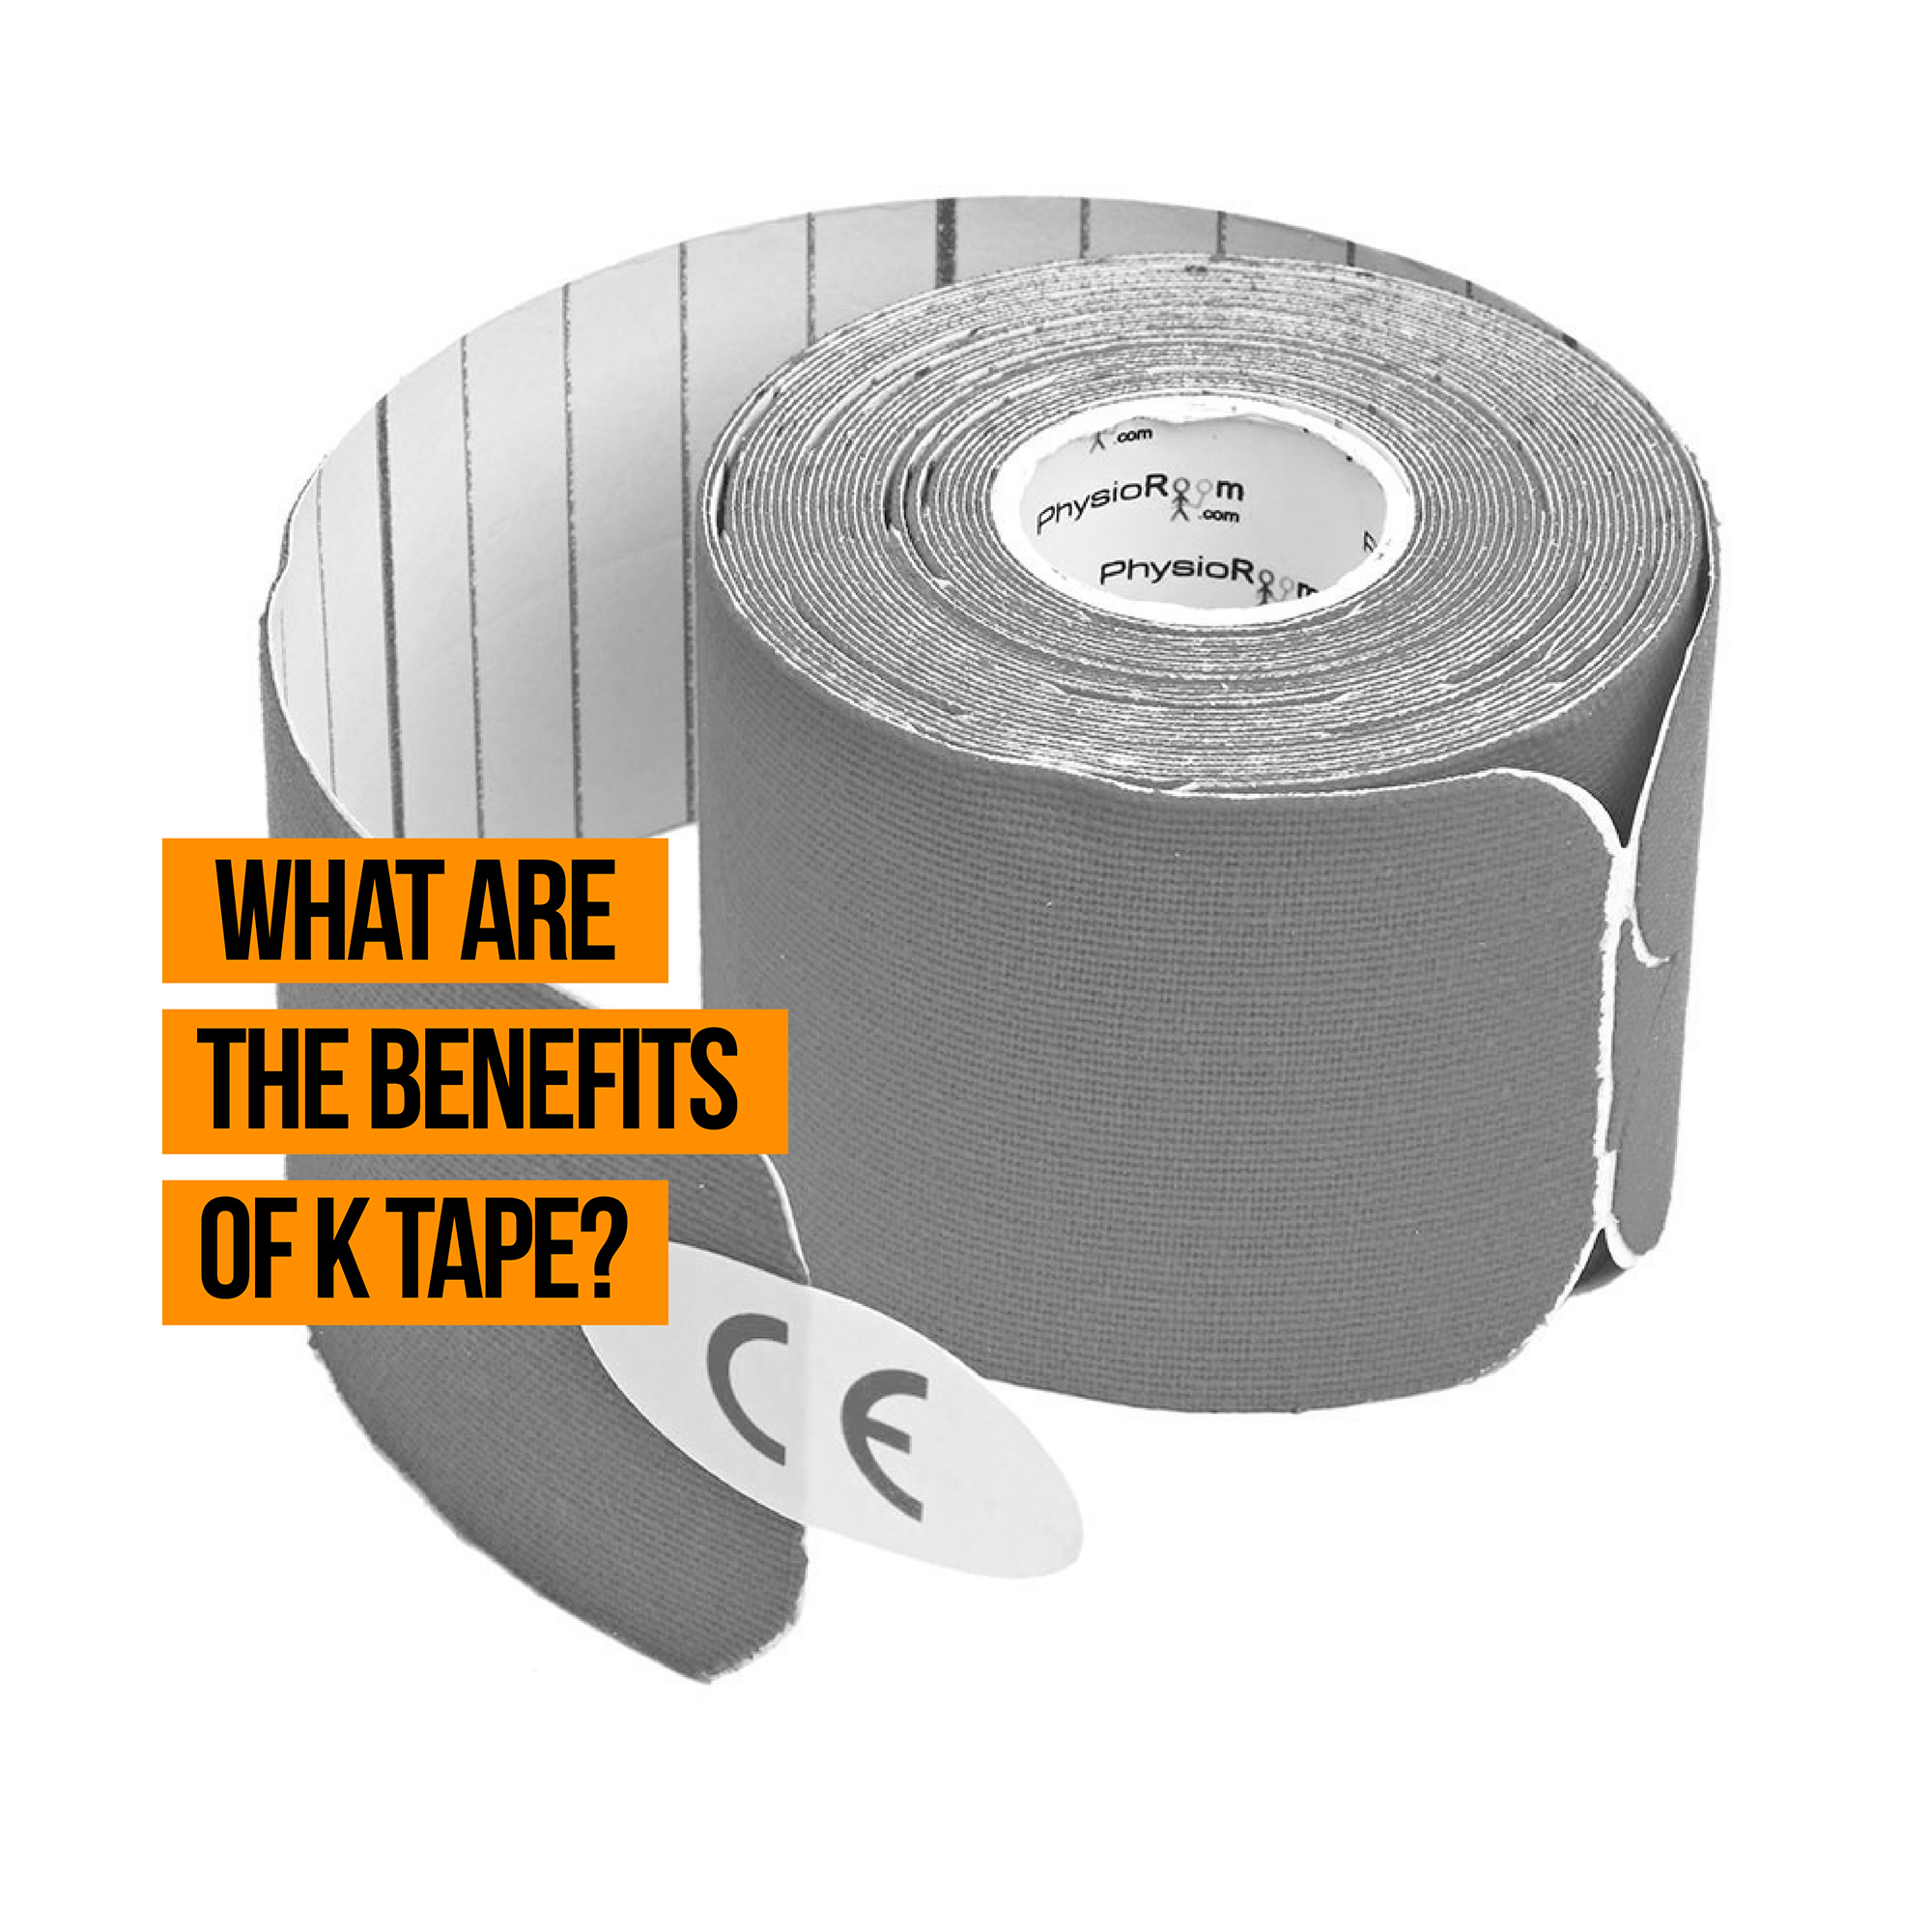 K Tape: What are the Benefits? - PhysioRoom Blog